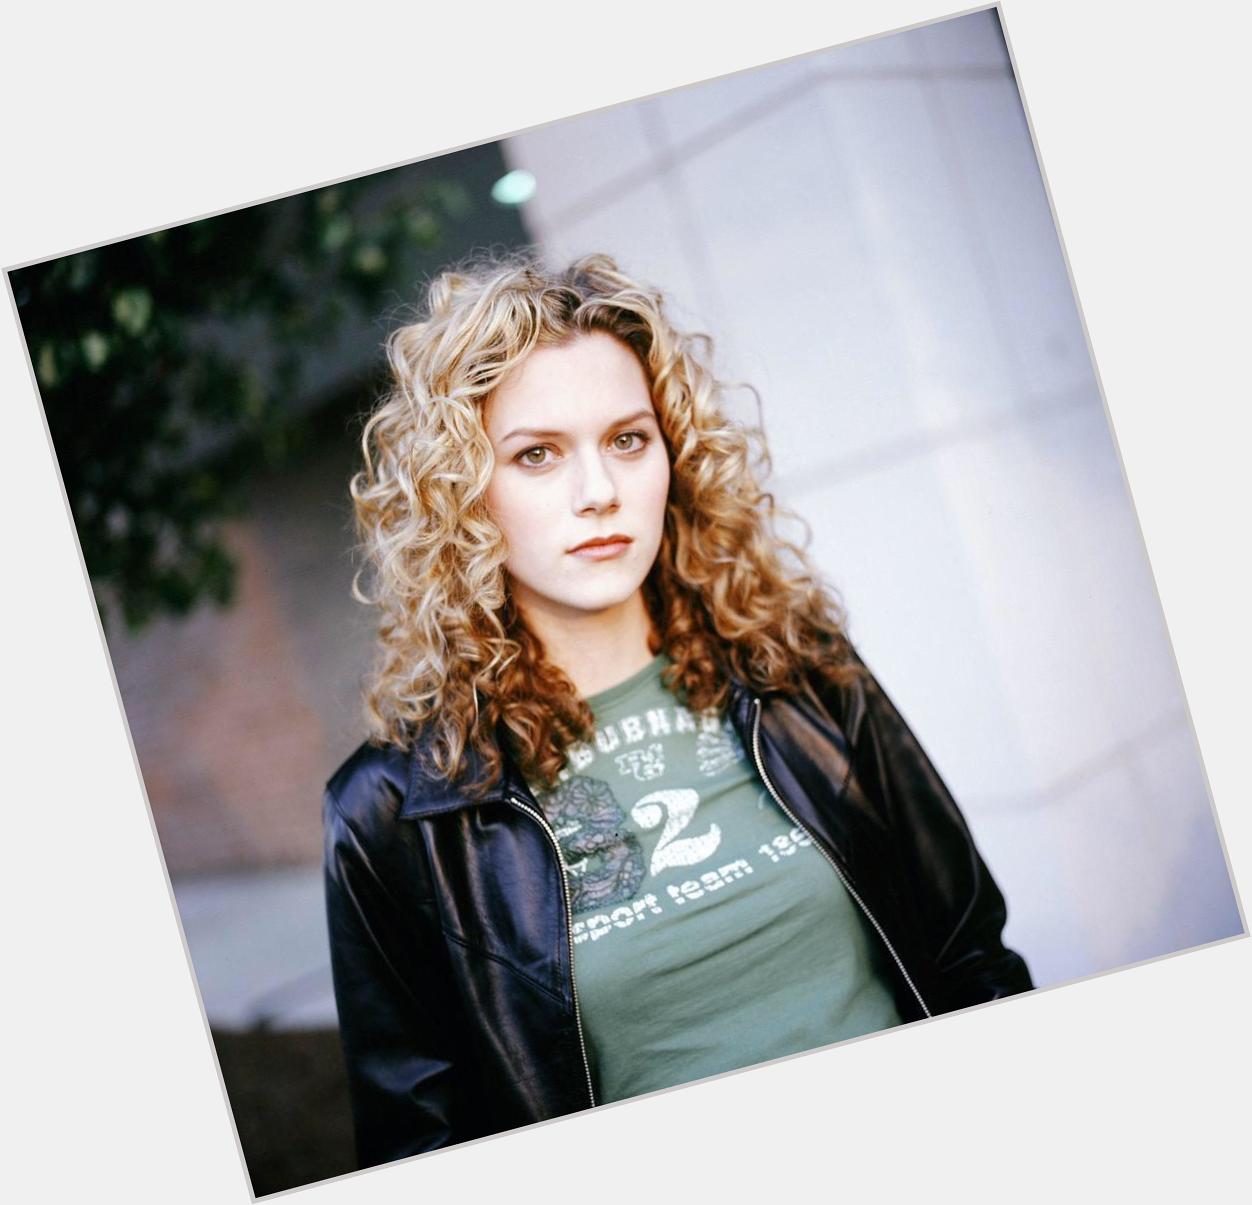 Happy bday to the amazing and talented hilarie burton Thank u for giving us so many wonderful Peyton sawyer moments  